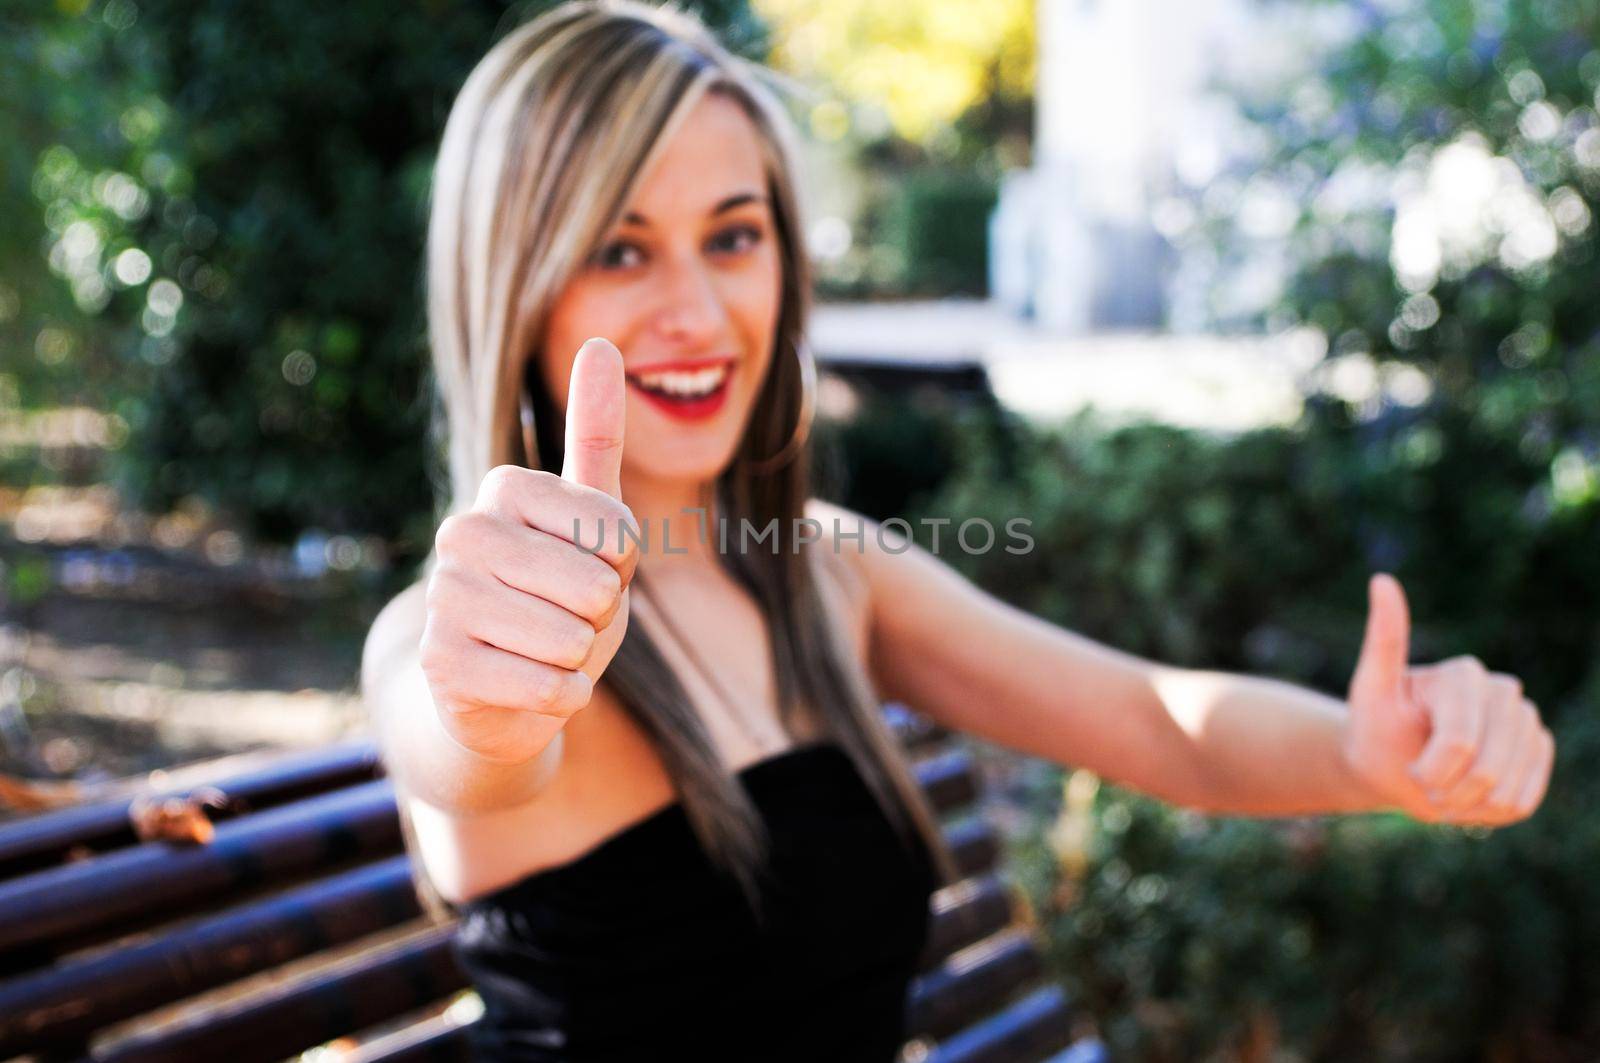 Pretty girl sitting in a bench in the park showing thumb up sign